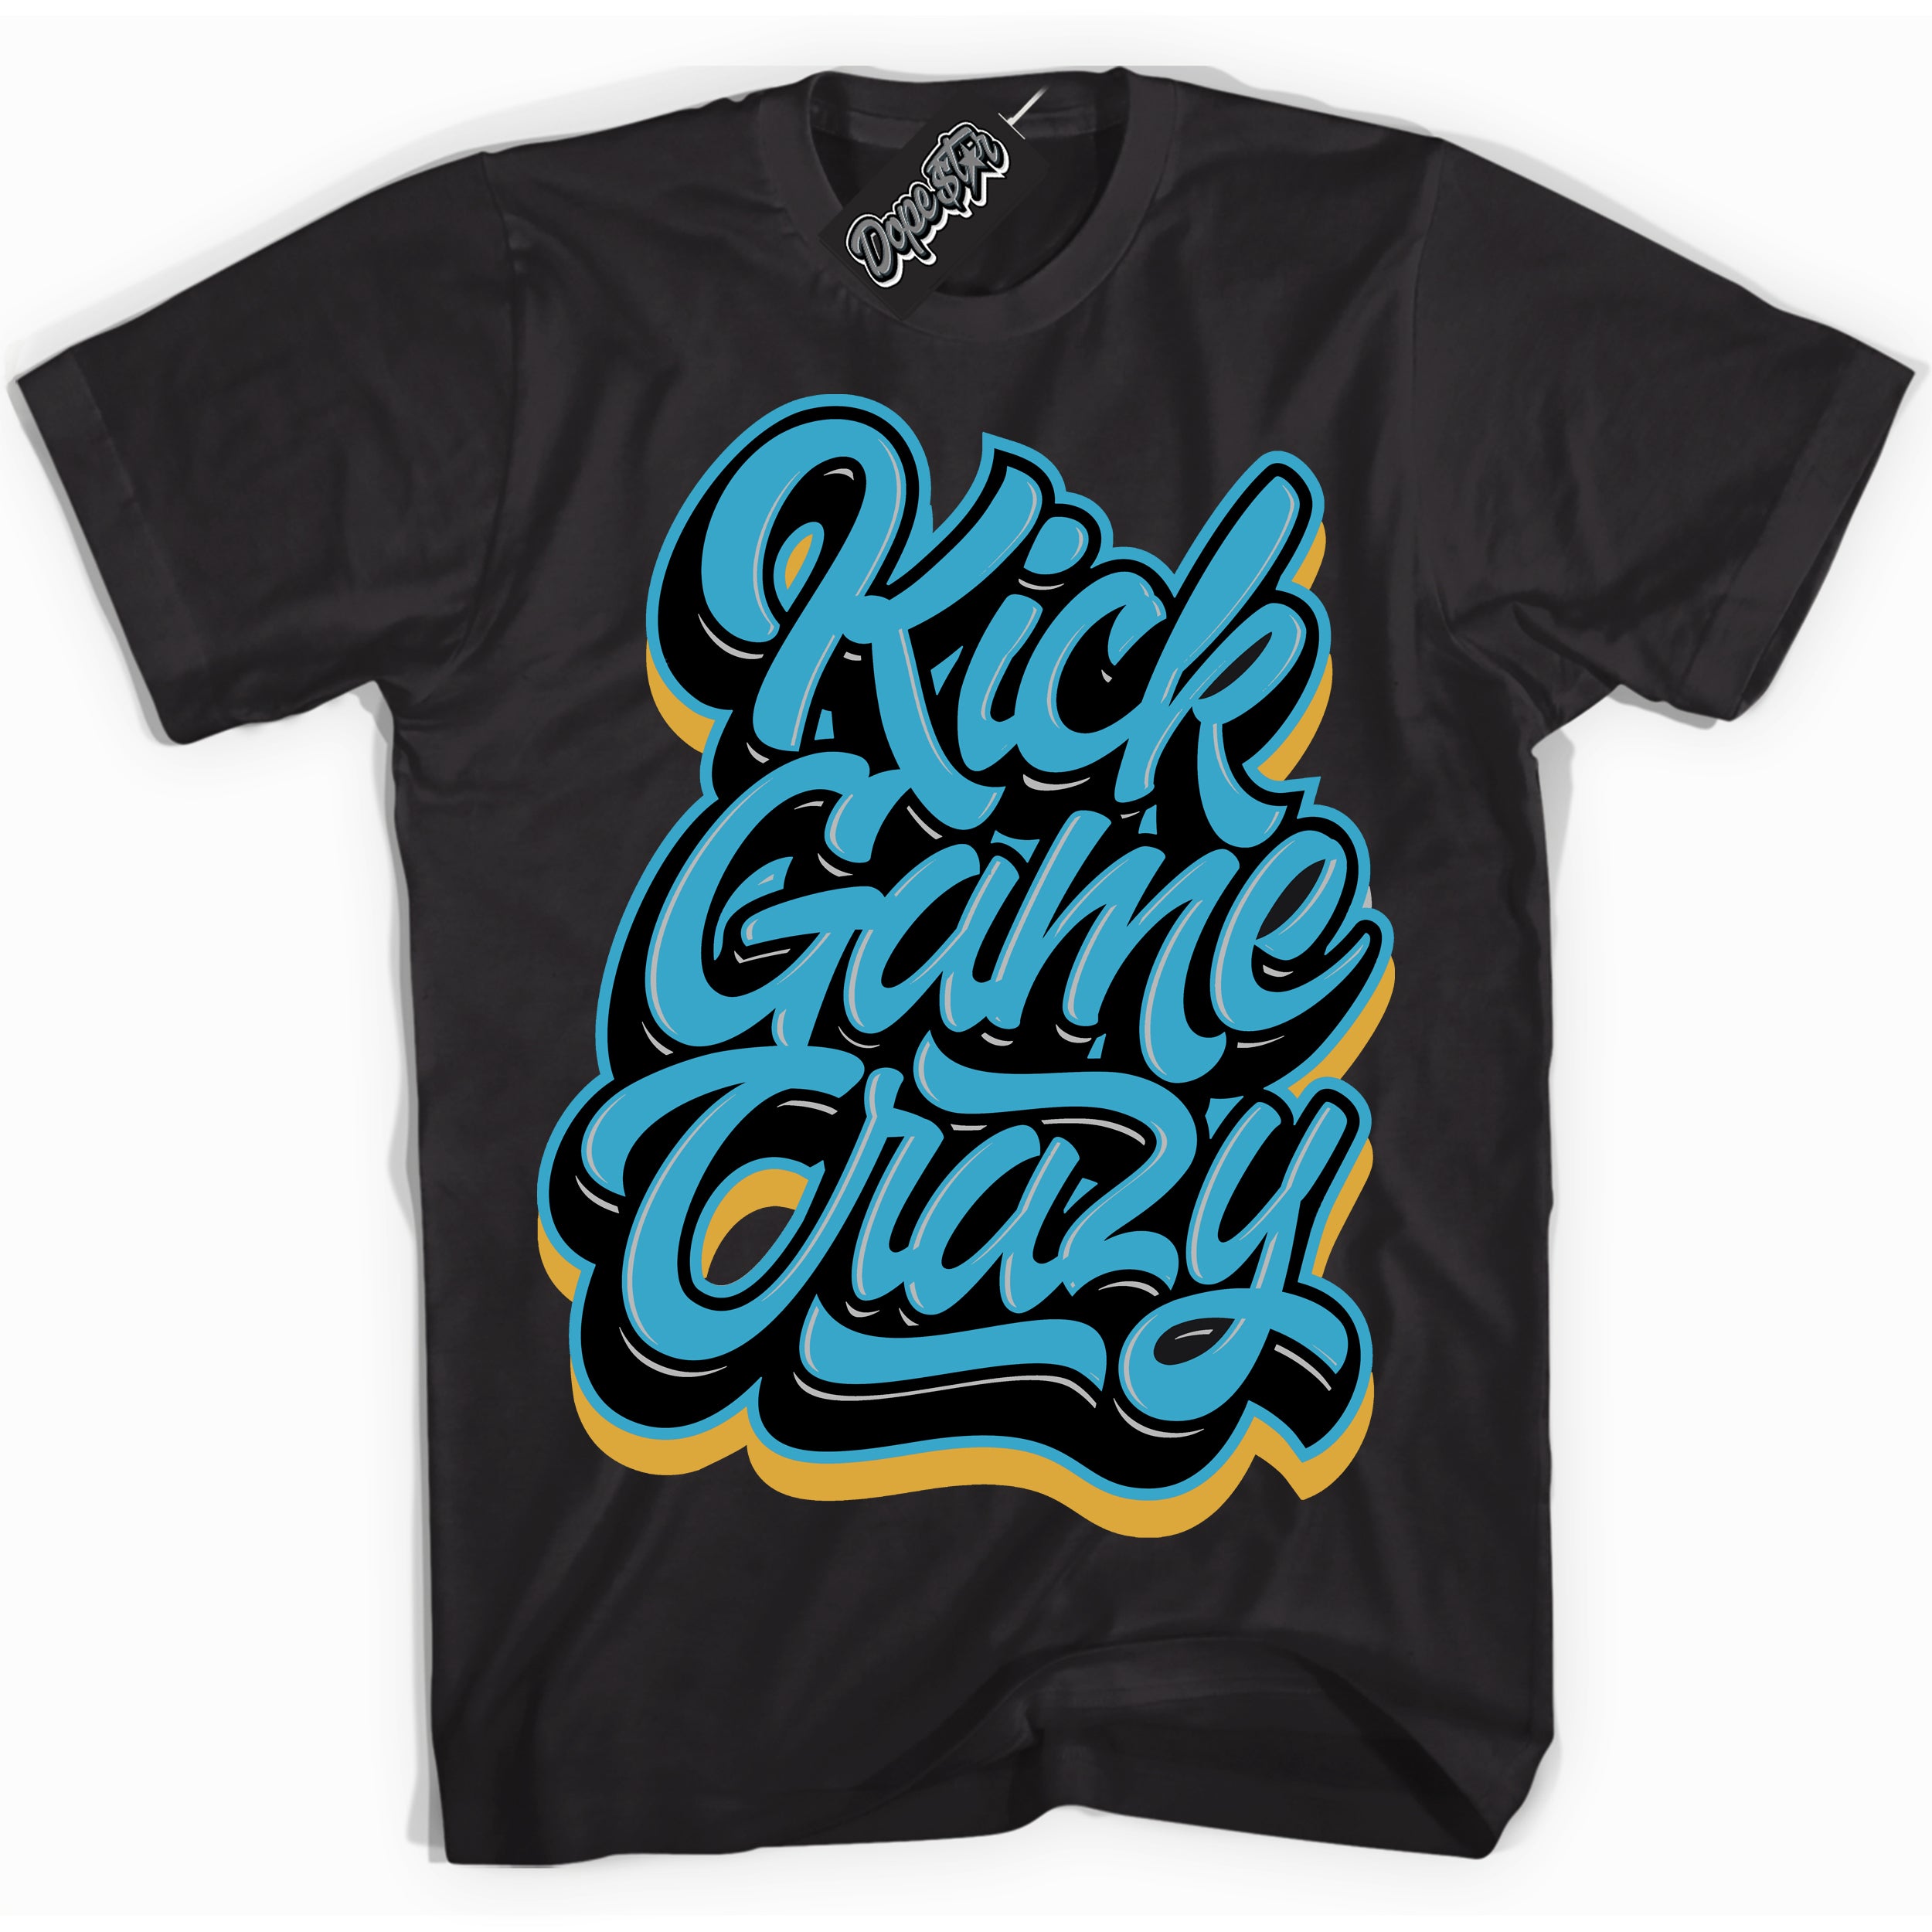 Cool Black Shirt with “ Kick Game Crazy” design that perfectly matches Aqua 5s Sneakers.